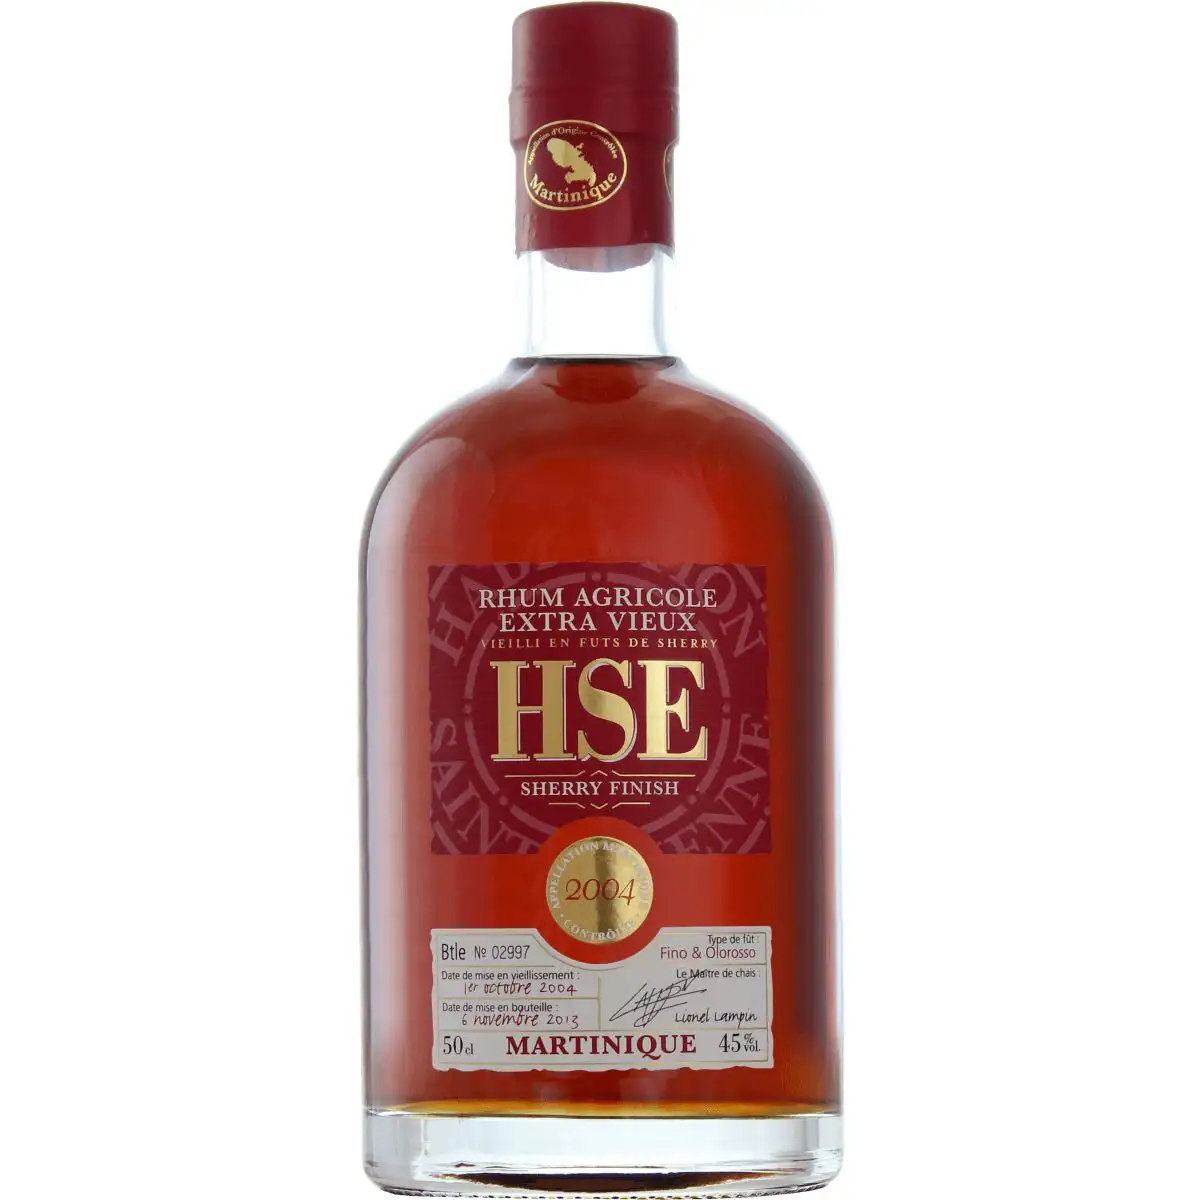 Image of the front of the bottle of the rum HSE Sherry Oloroso Finish